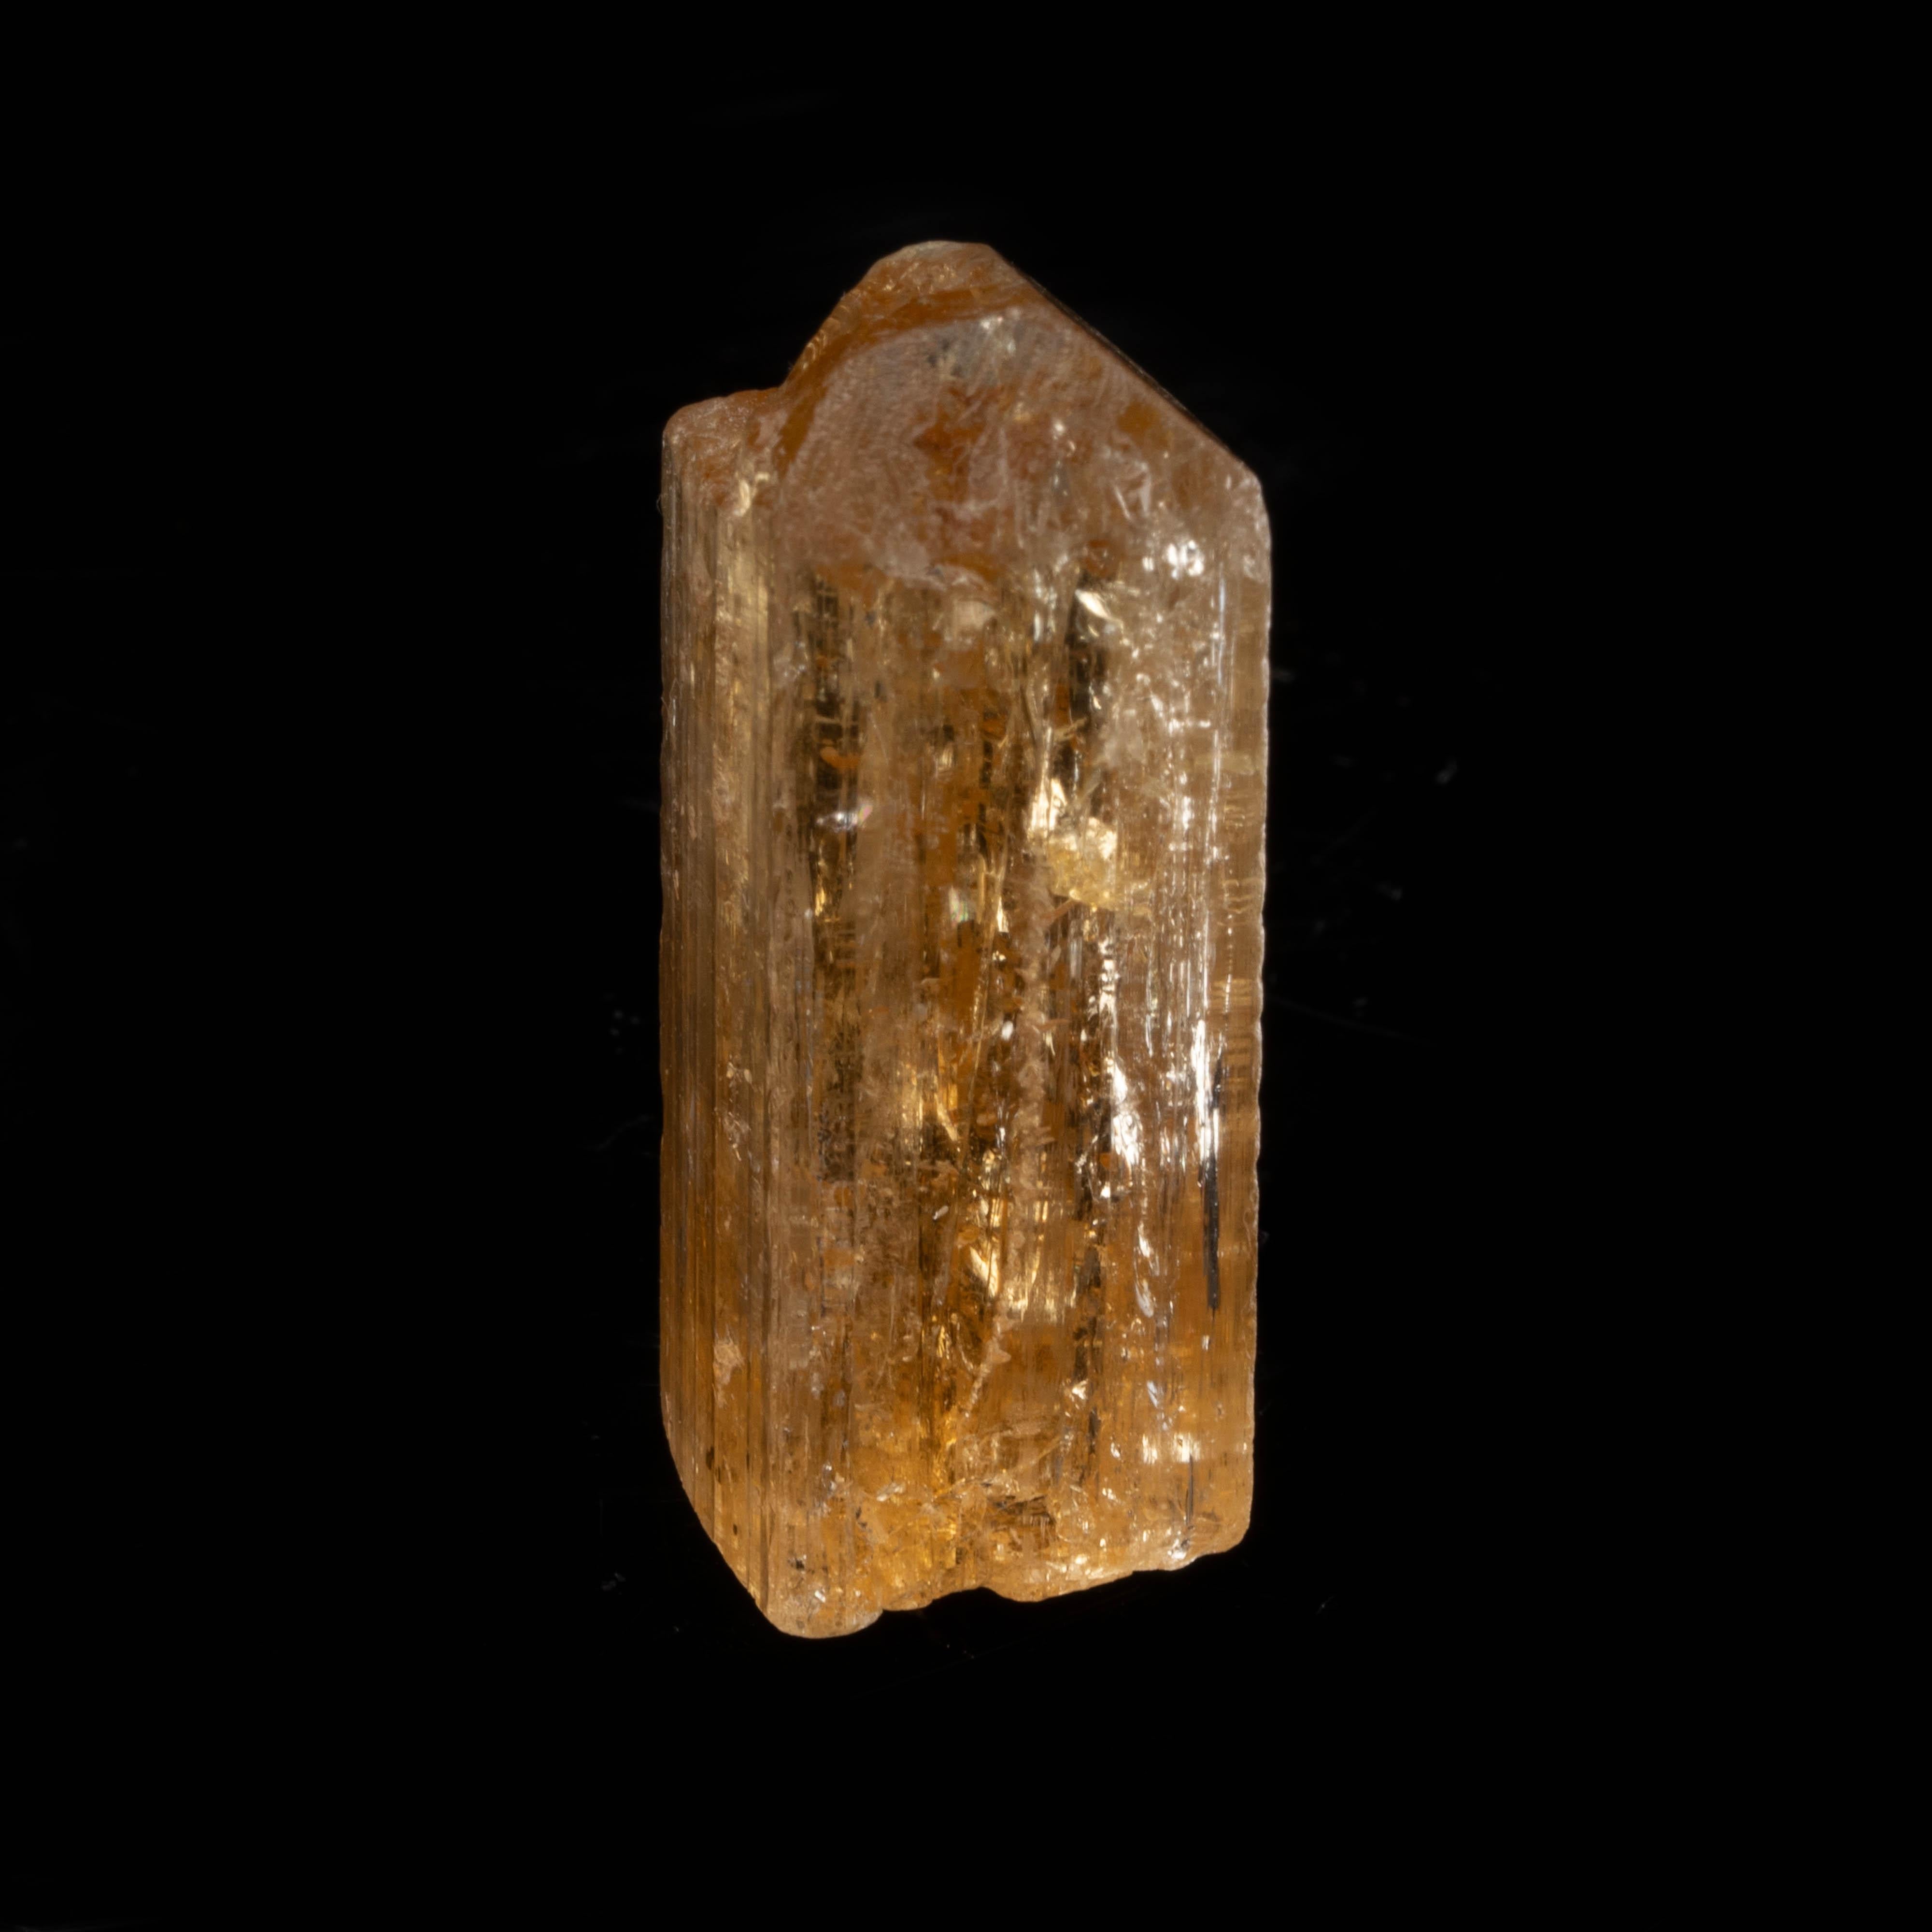 Ouro Preto, Minas Gerais, Brazil

This true imperial topaz single crystal was sourced from the small district of Ouro Preto, Brazil – famous for its topaz – and displays a good termination and gorgeous natural striations and luster.

Dimensions: